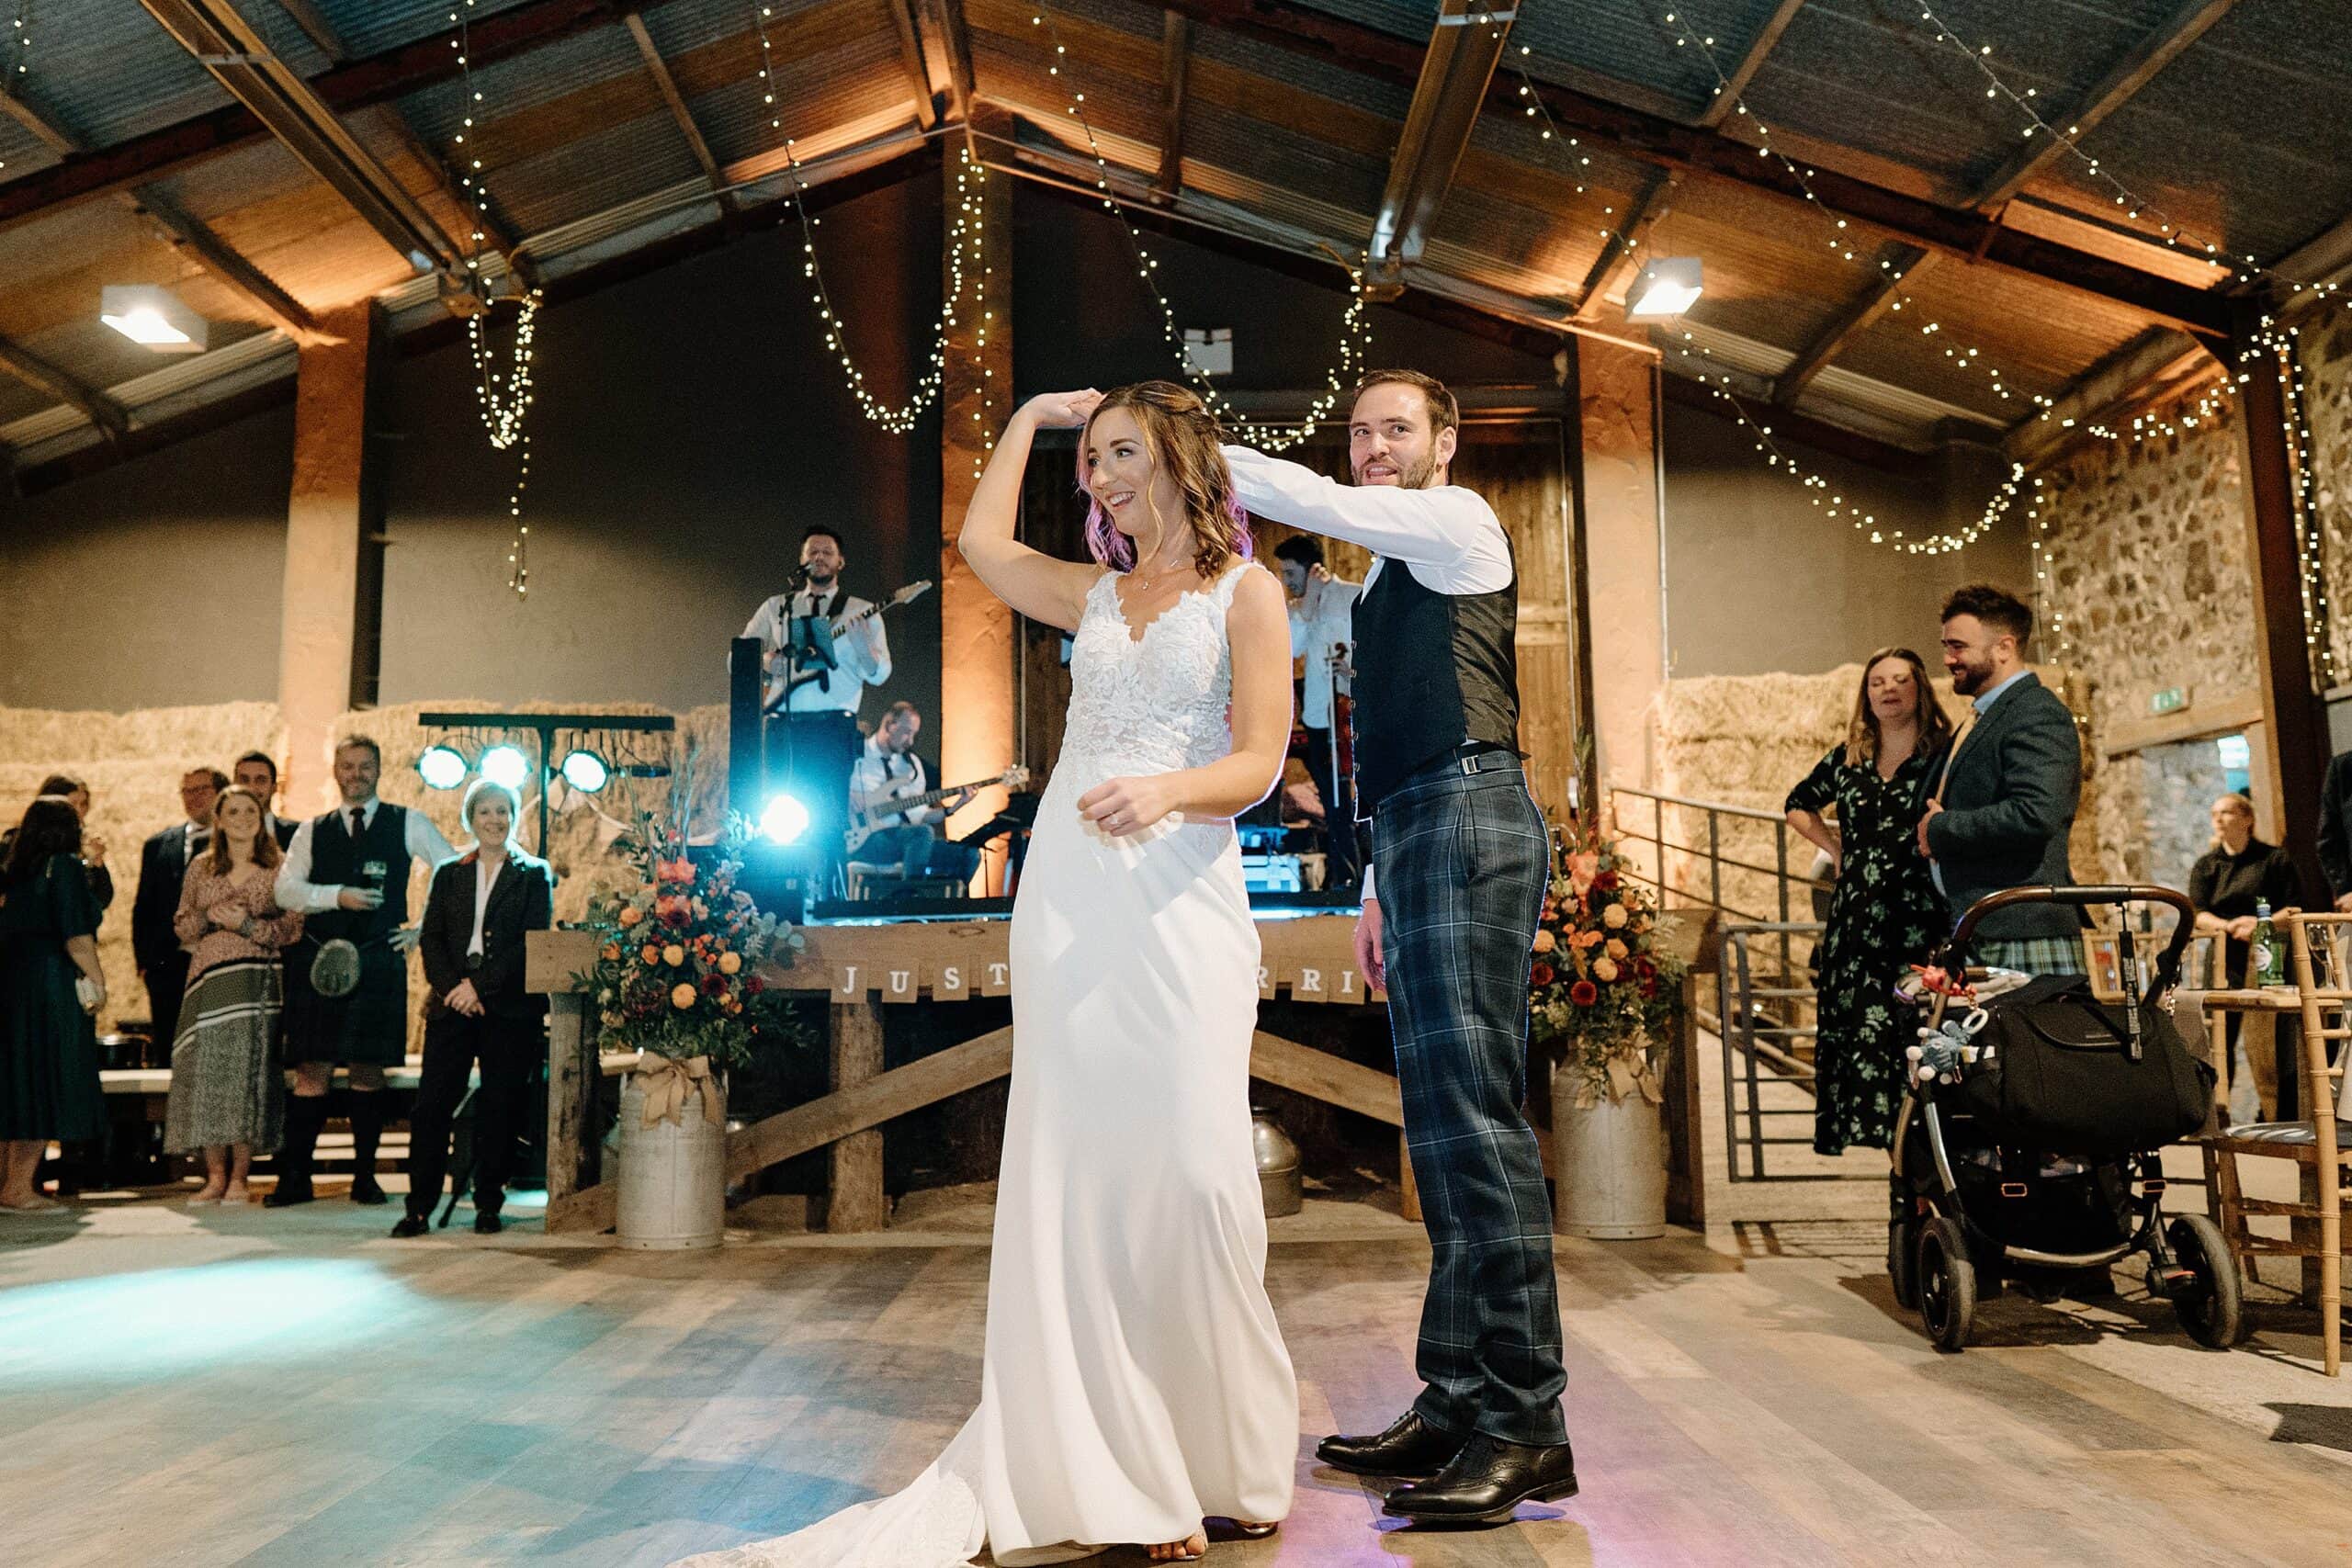 bride and groom in first dance beneath festoon lights as band play in the background in the hay barn at harelaw farm wedding venue fenwick scotland